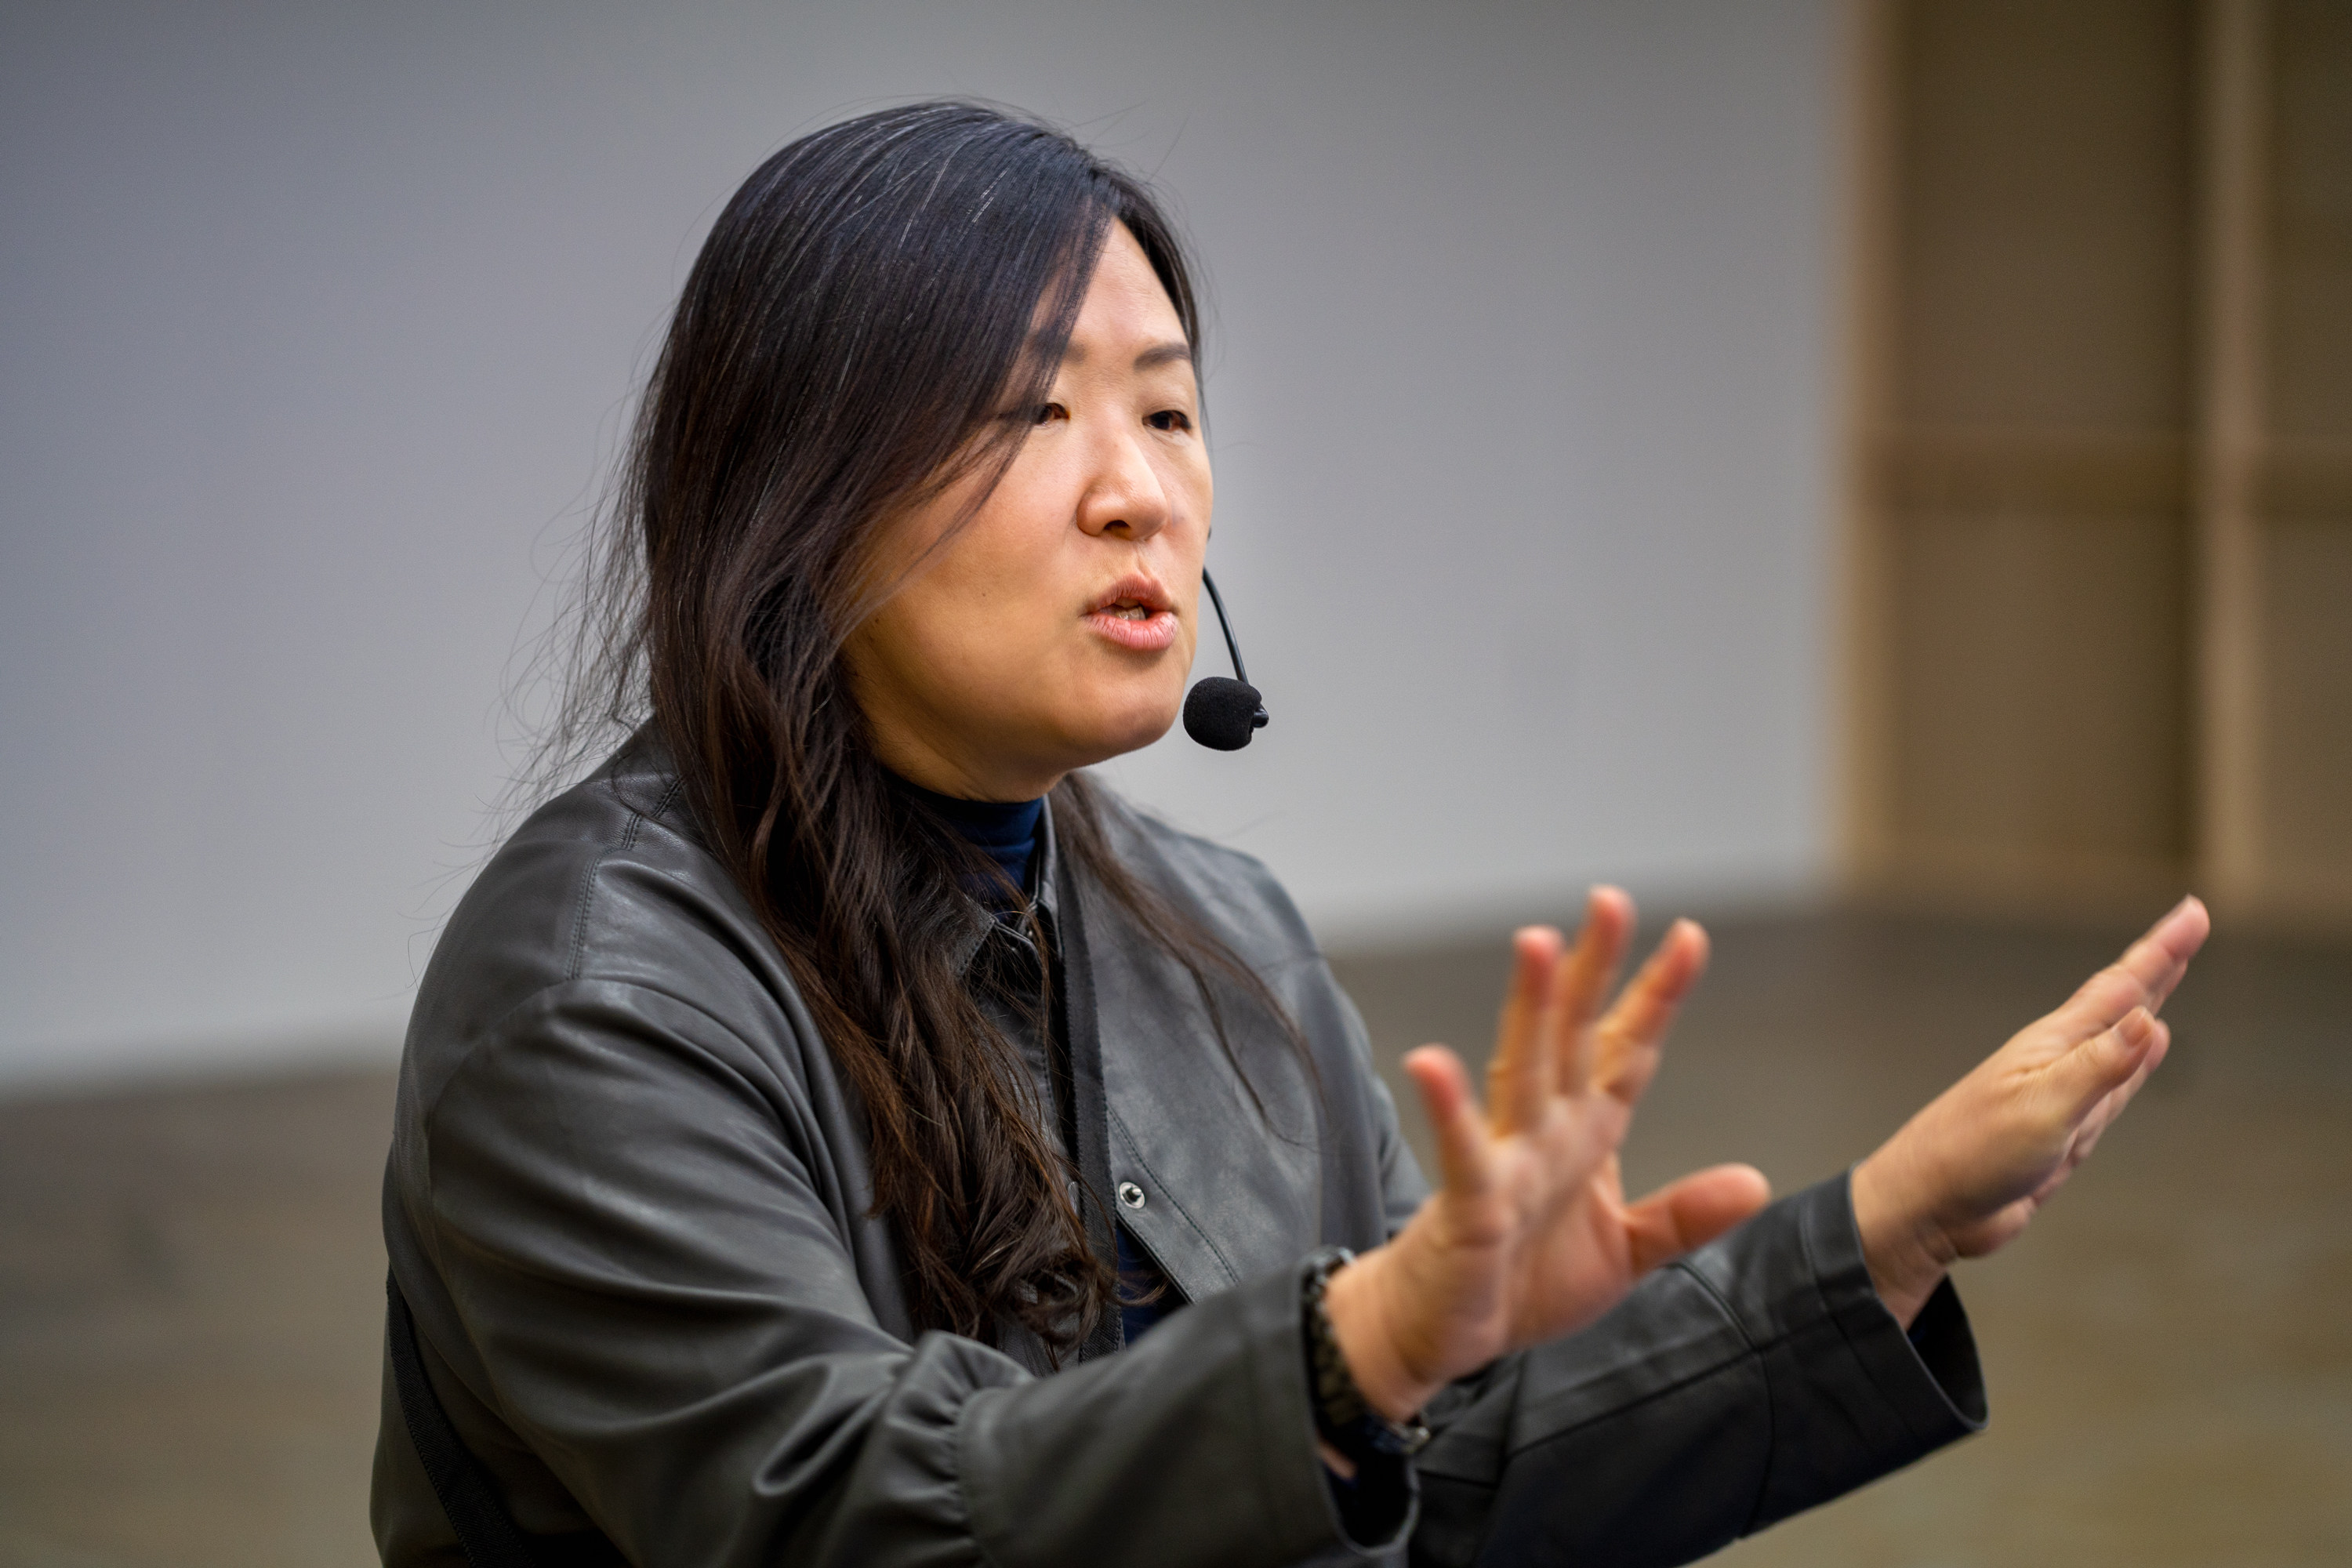 For Sook-Kyung Lee, artistic director of the 14th Gwangju Biennale in South Korea, her appointment is not just a homecoming but a chance to show her perspective on contemporary art as a curator working in the West. Photo: Gwangju Biennale Foundation